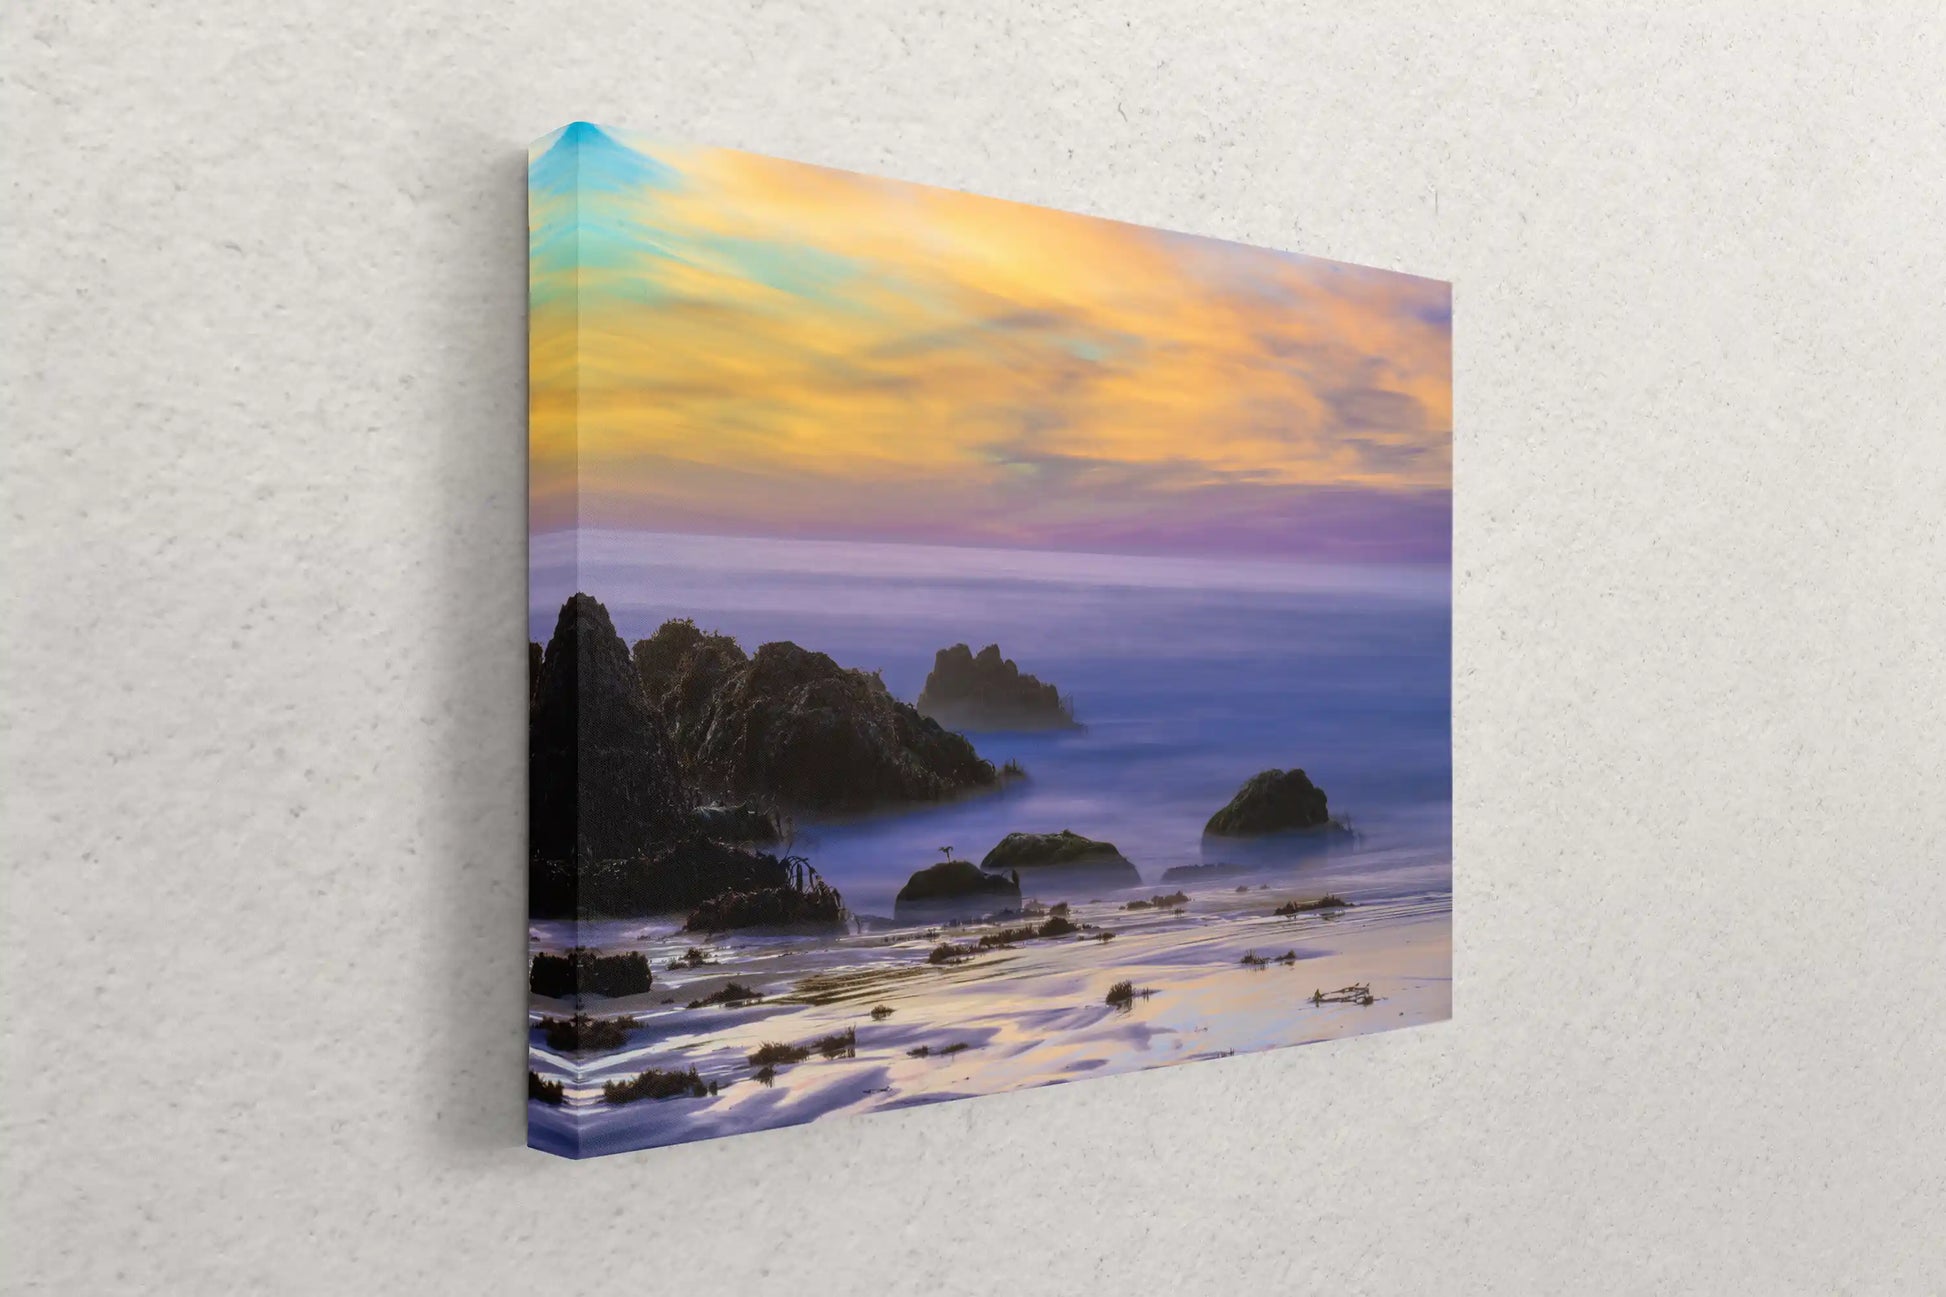 Wall art of a stunning Big Sur sunset at Purple Sand Beach, with vivid purples and golds casting a tranquil ambiance.